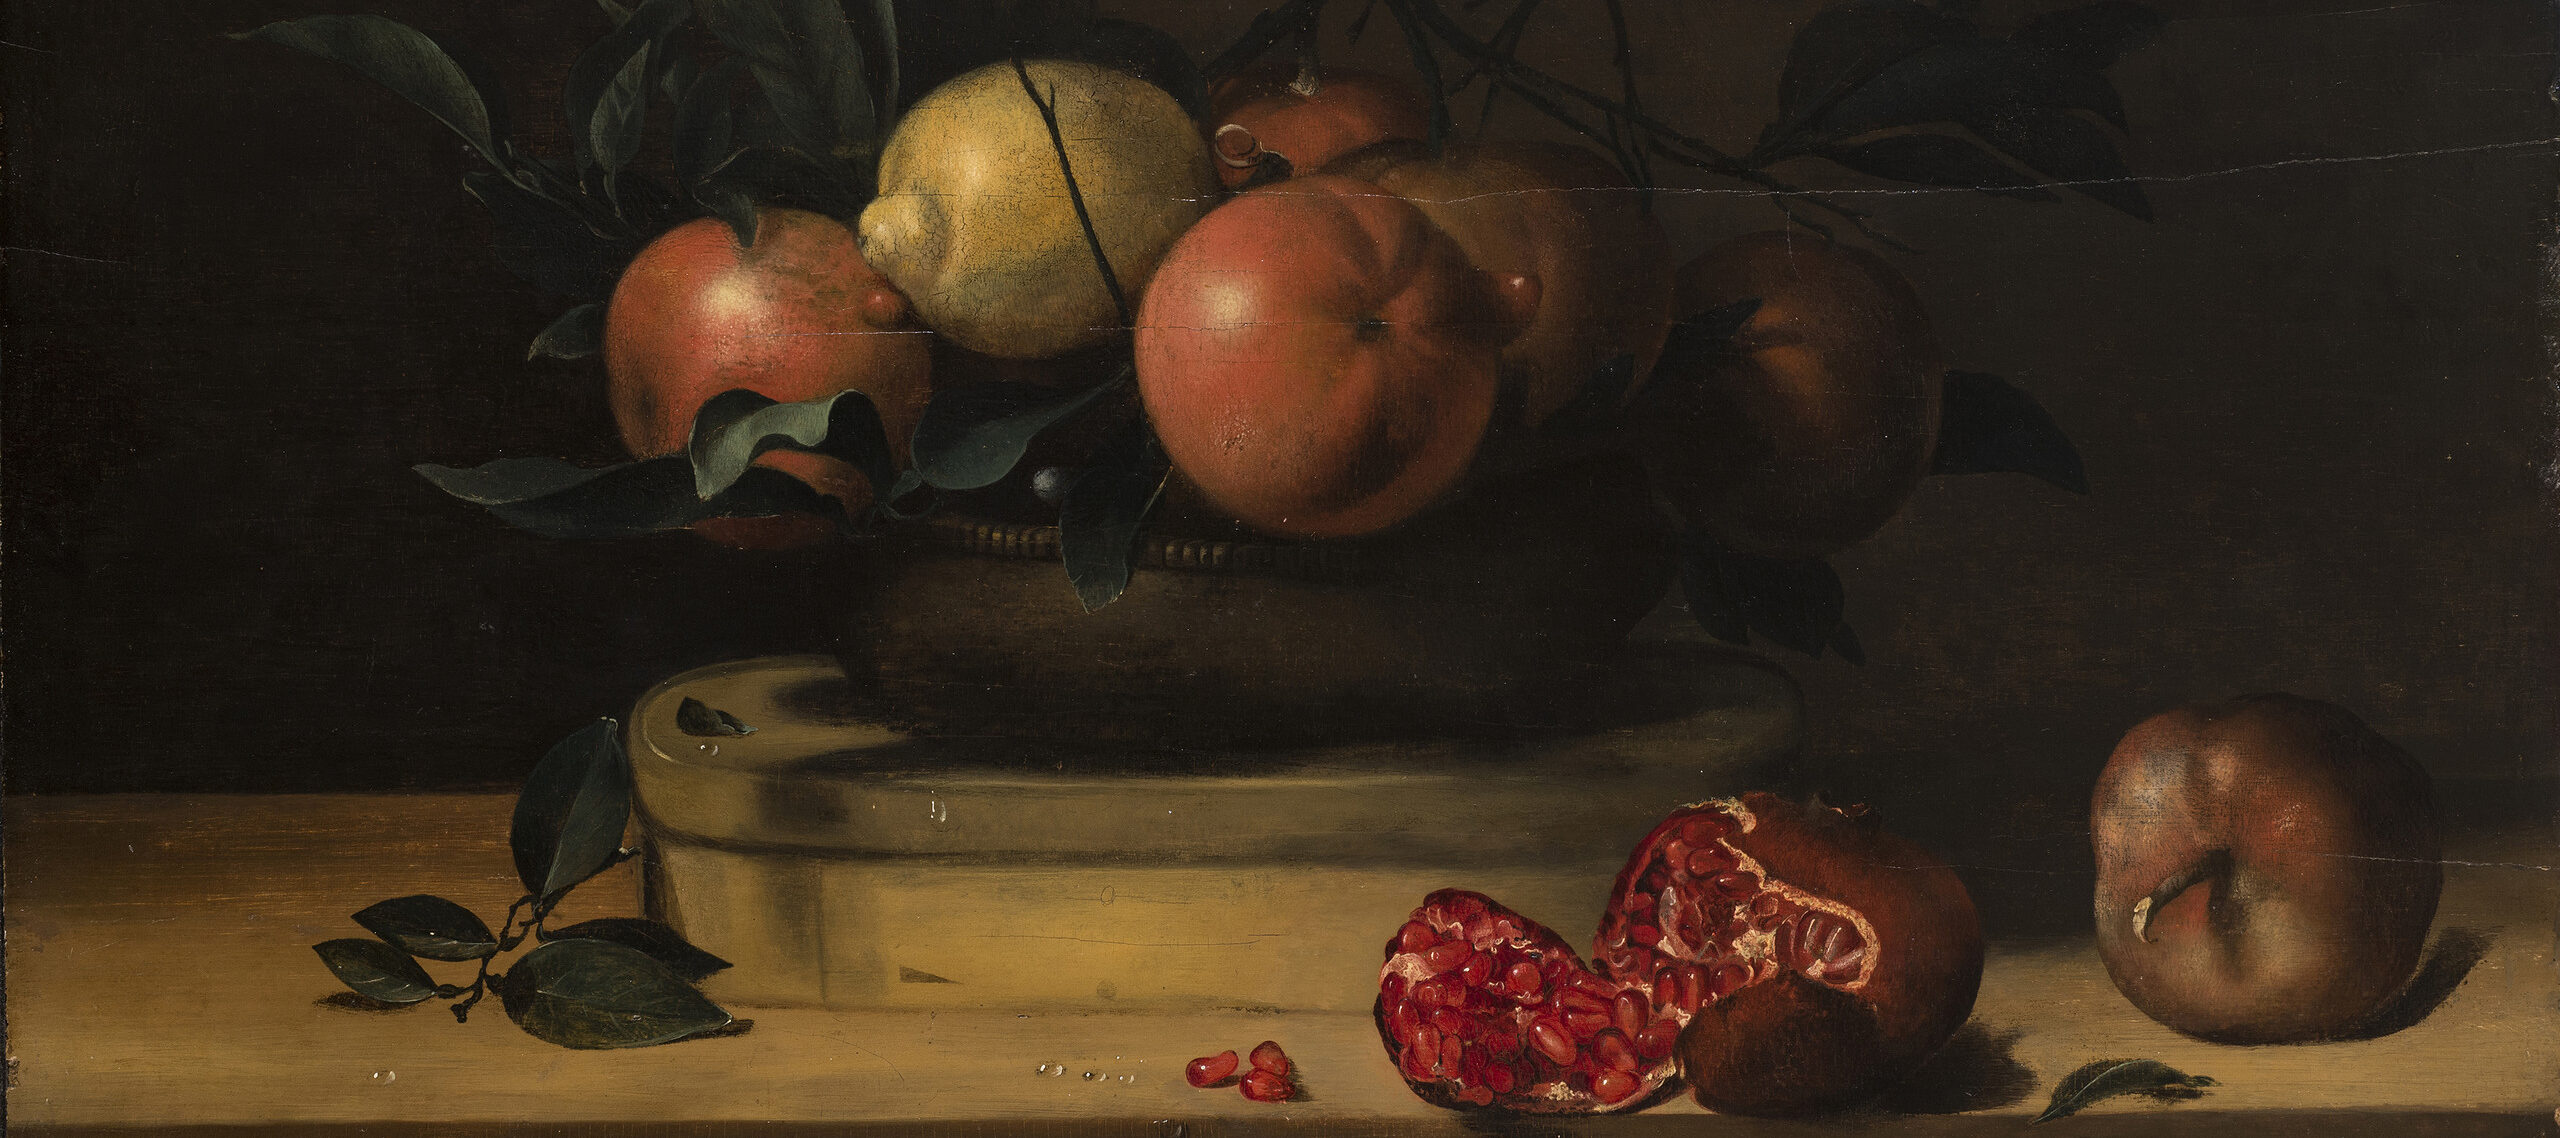 A vessel mounded with 5 oranges, a lemon, and greenery sits atop an oval, wooden box resting on a wooden plank. In the foreground, two pomegranates, one of which has split open and dropped three seeds, balance near the plank’s edge. Droplets of water dot the fruit and the table.